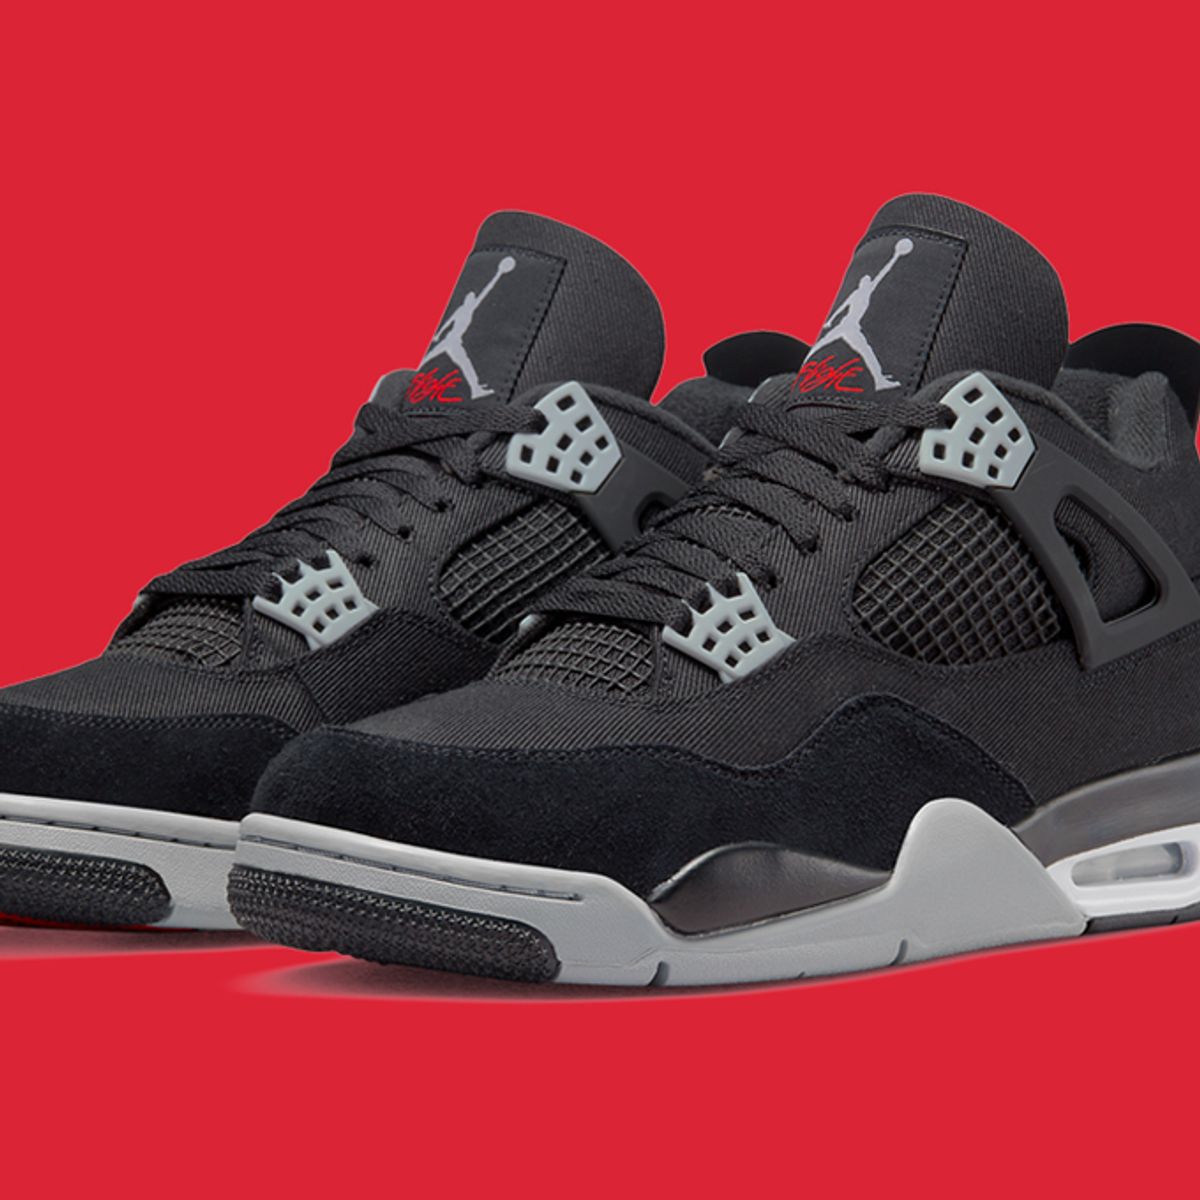 Jordan 4 Retro OG Mid Bred for Sale, Authenticity Guaranteed